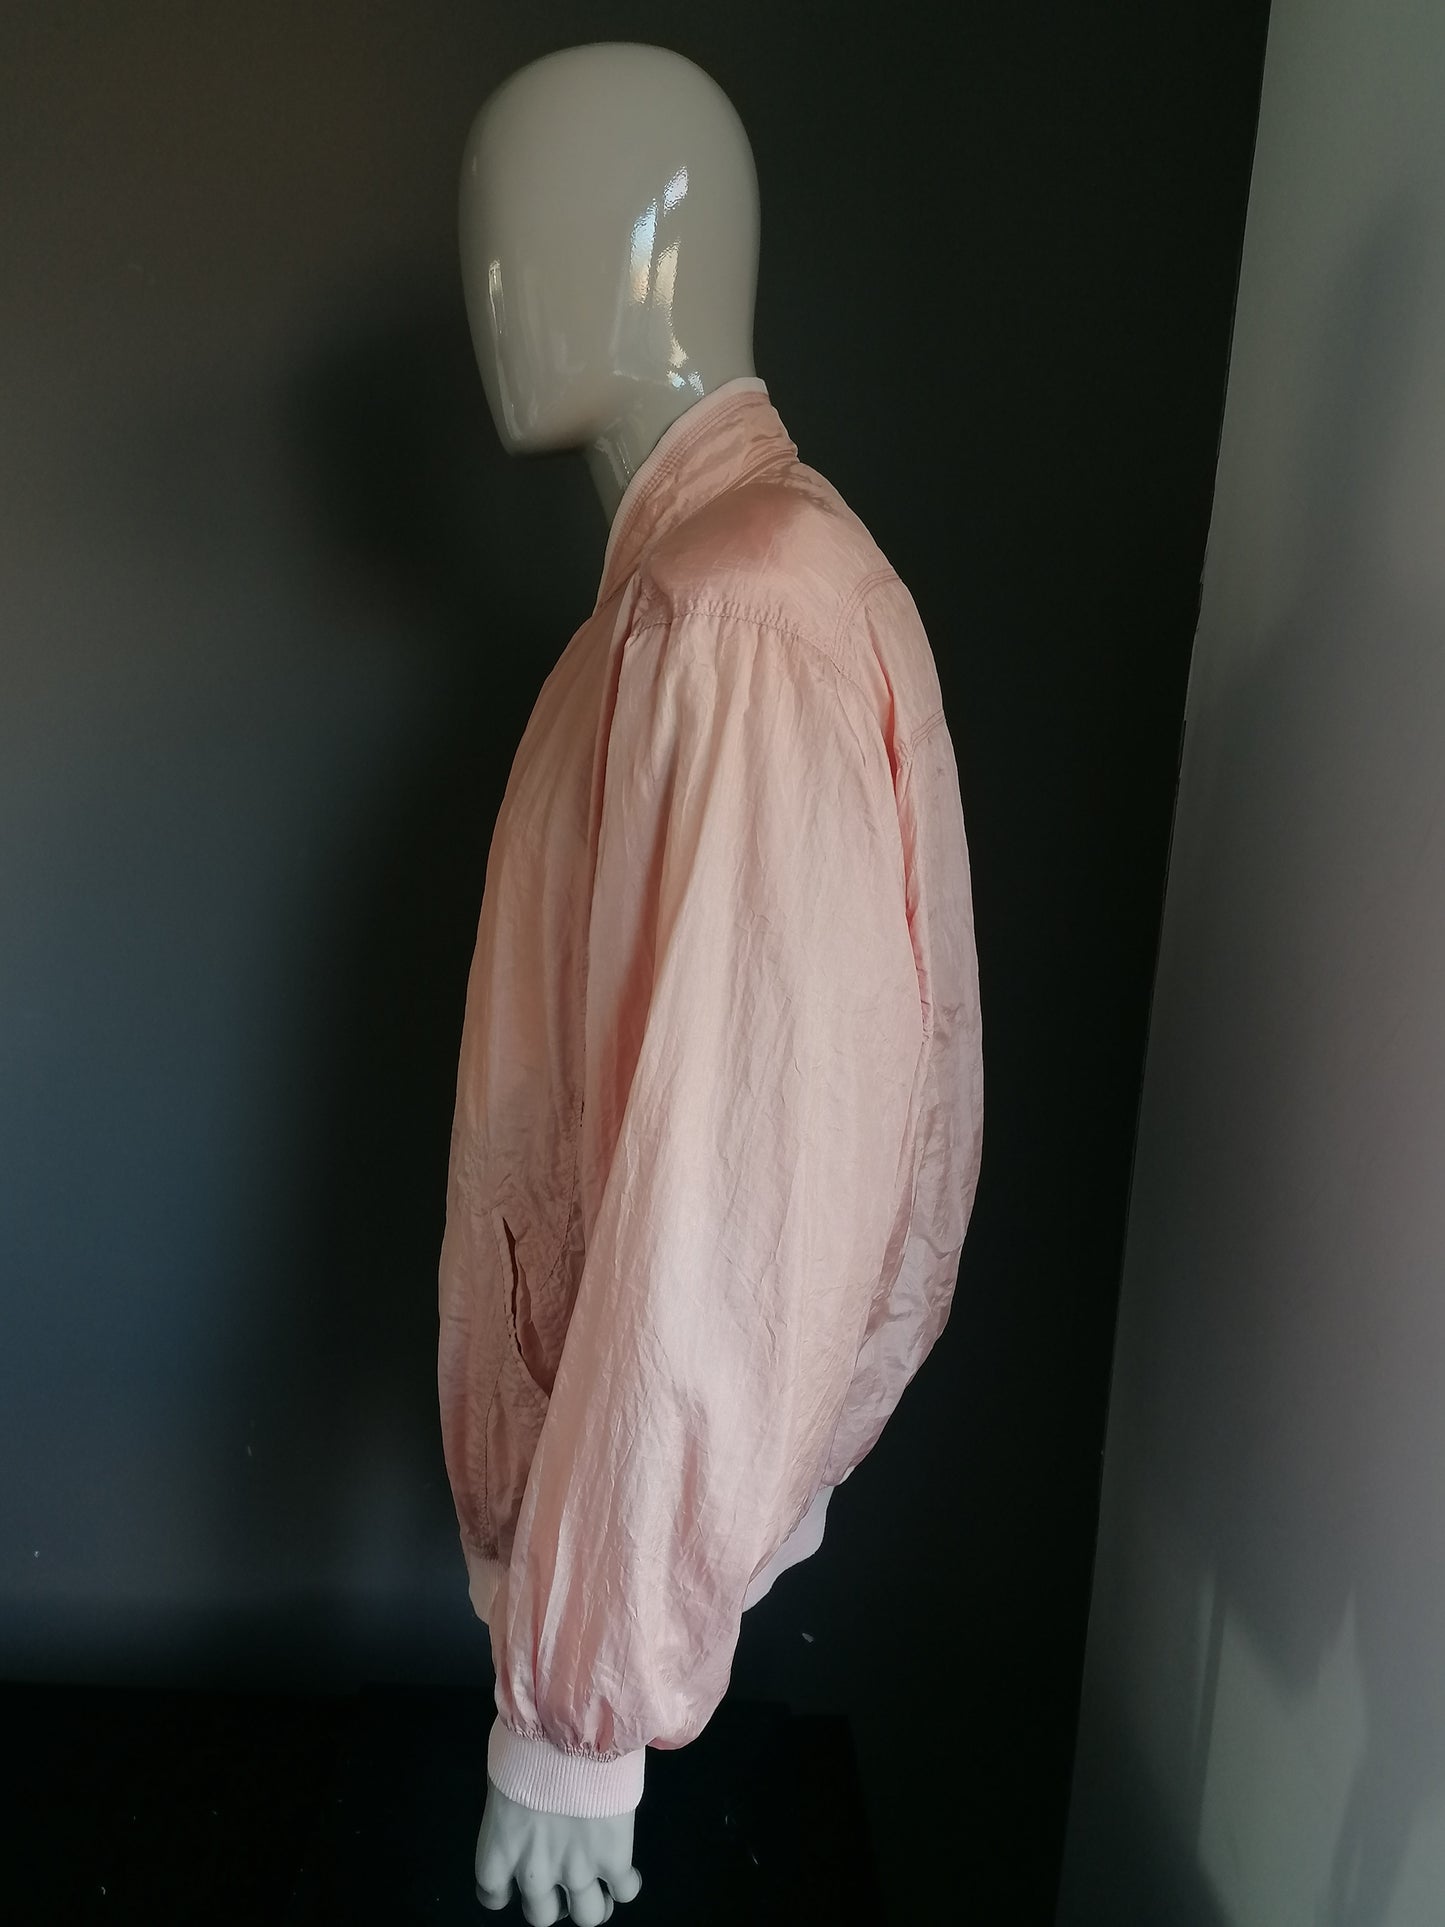 Vintage Central Park 80s-90's training jacket with shoulder fillings. Pink colored. Size XXL / 2XL.